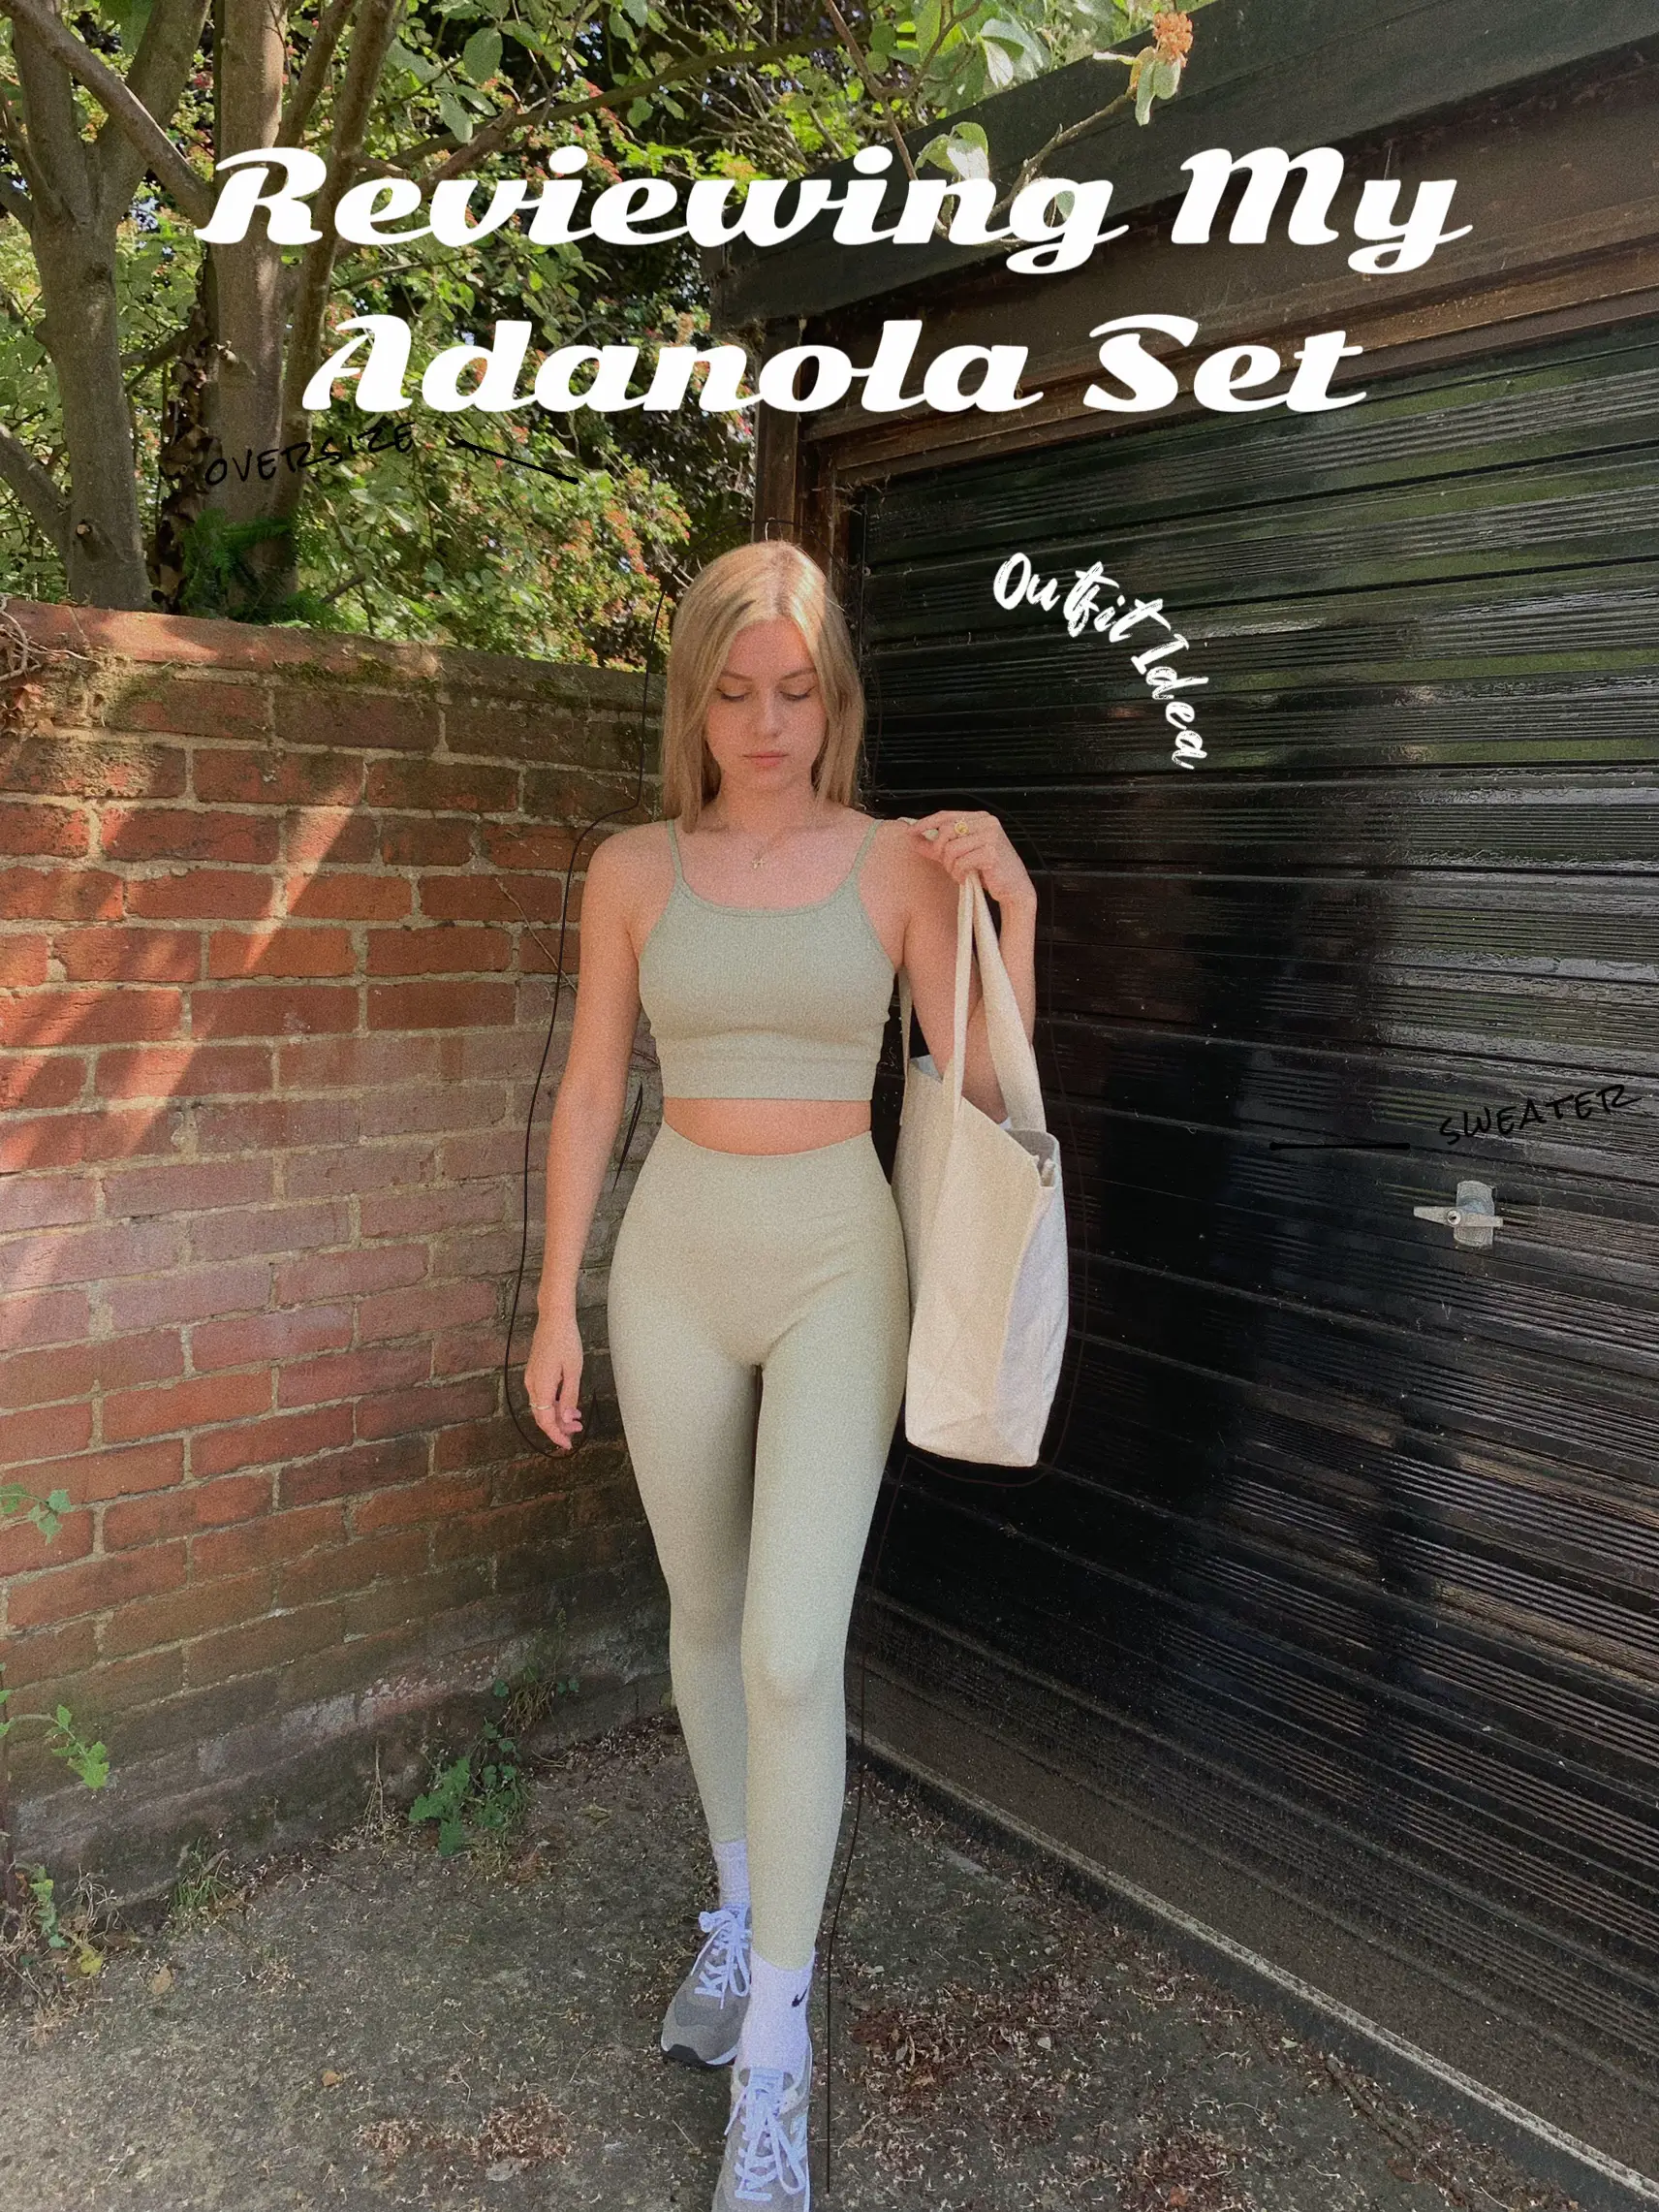 Reviewing my Adanola Set, Gallery posted by Chloe Milton